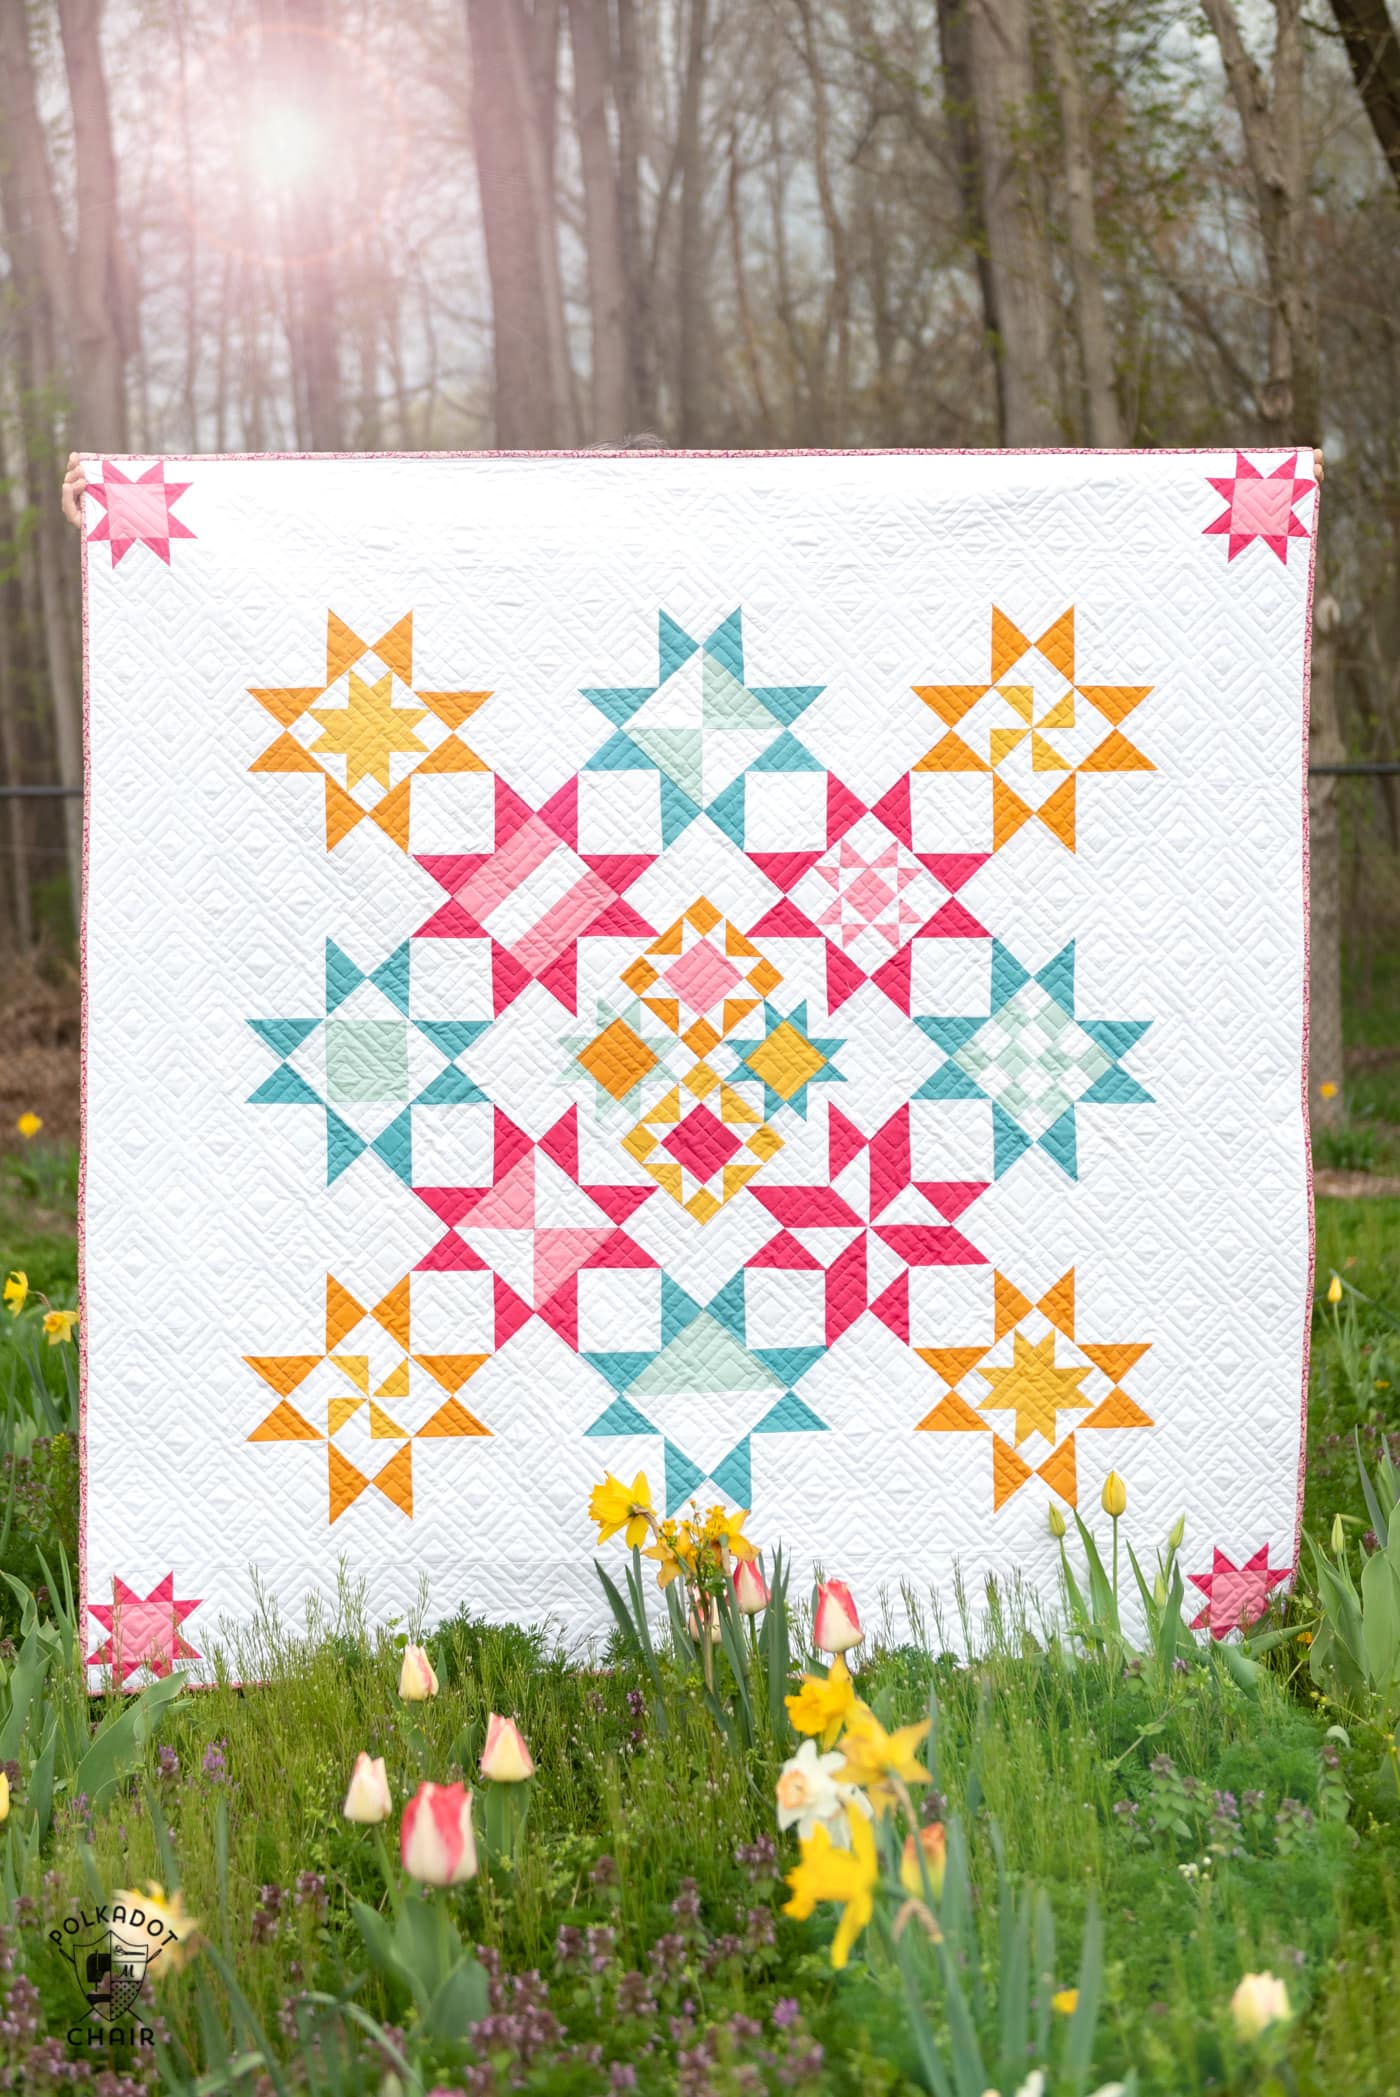 My Finished Choose Happiness Quilt